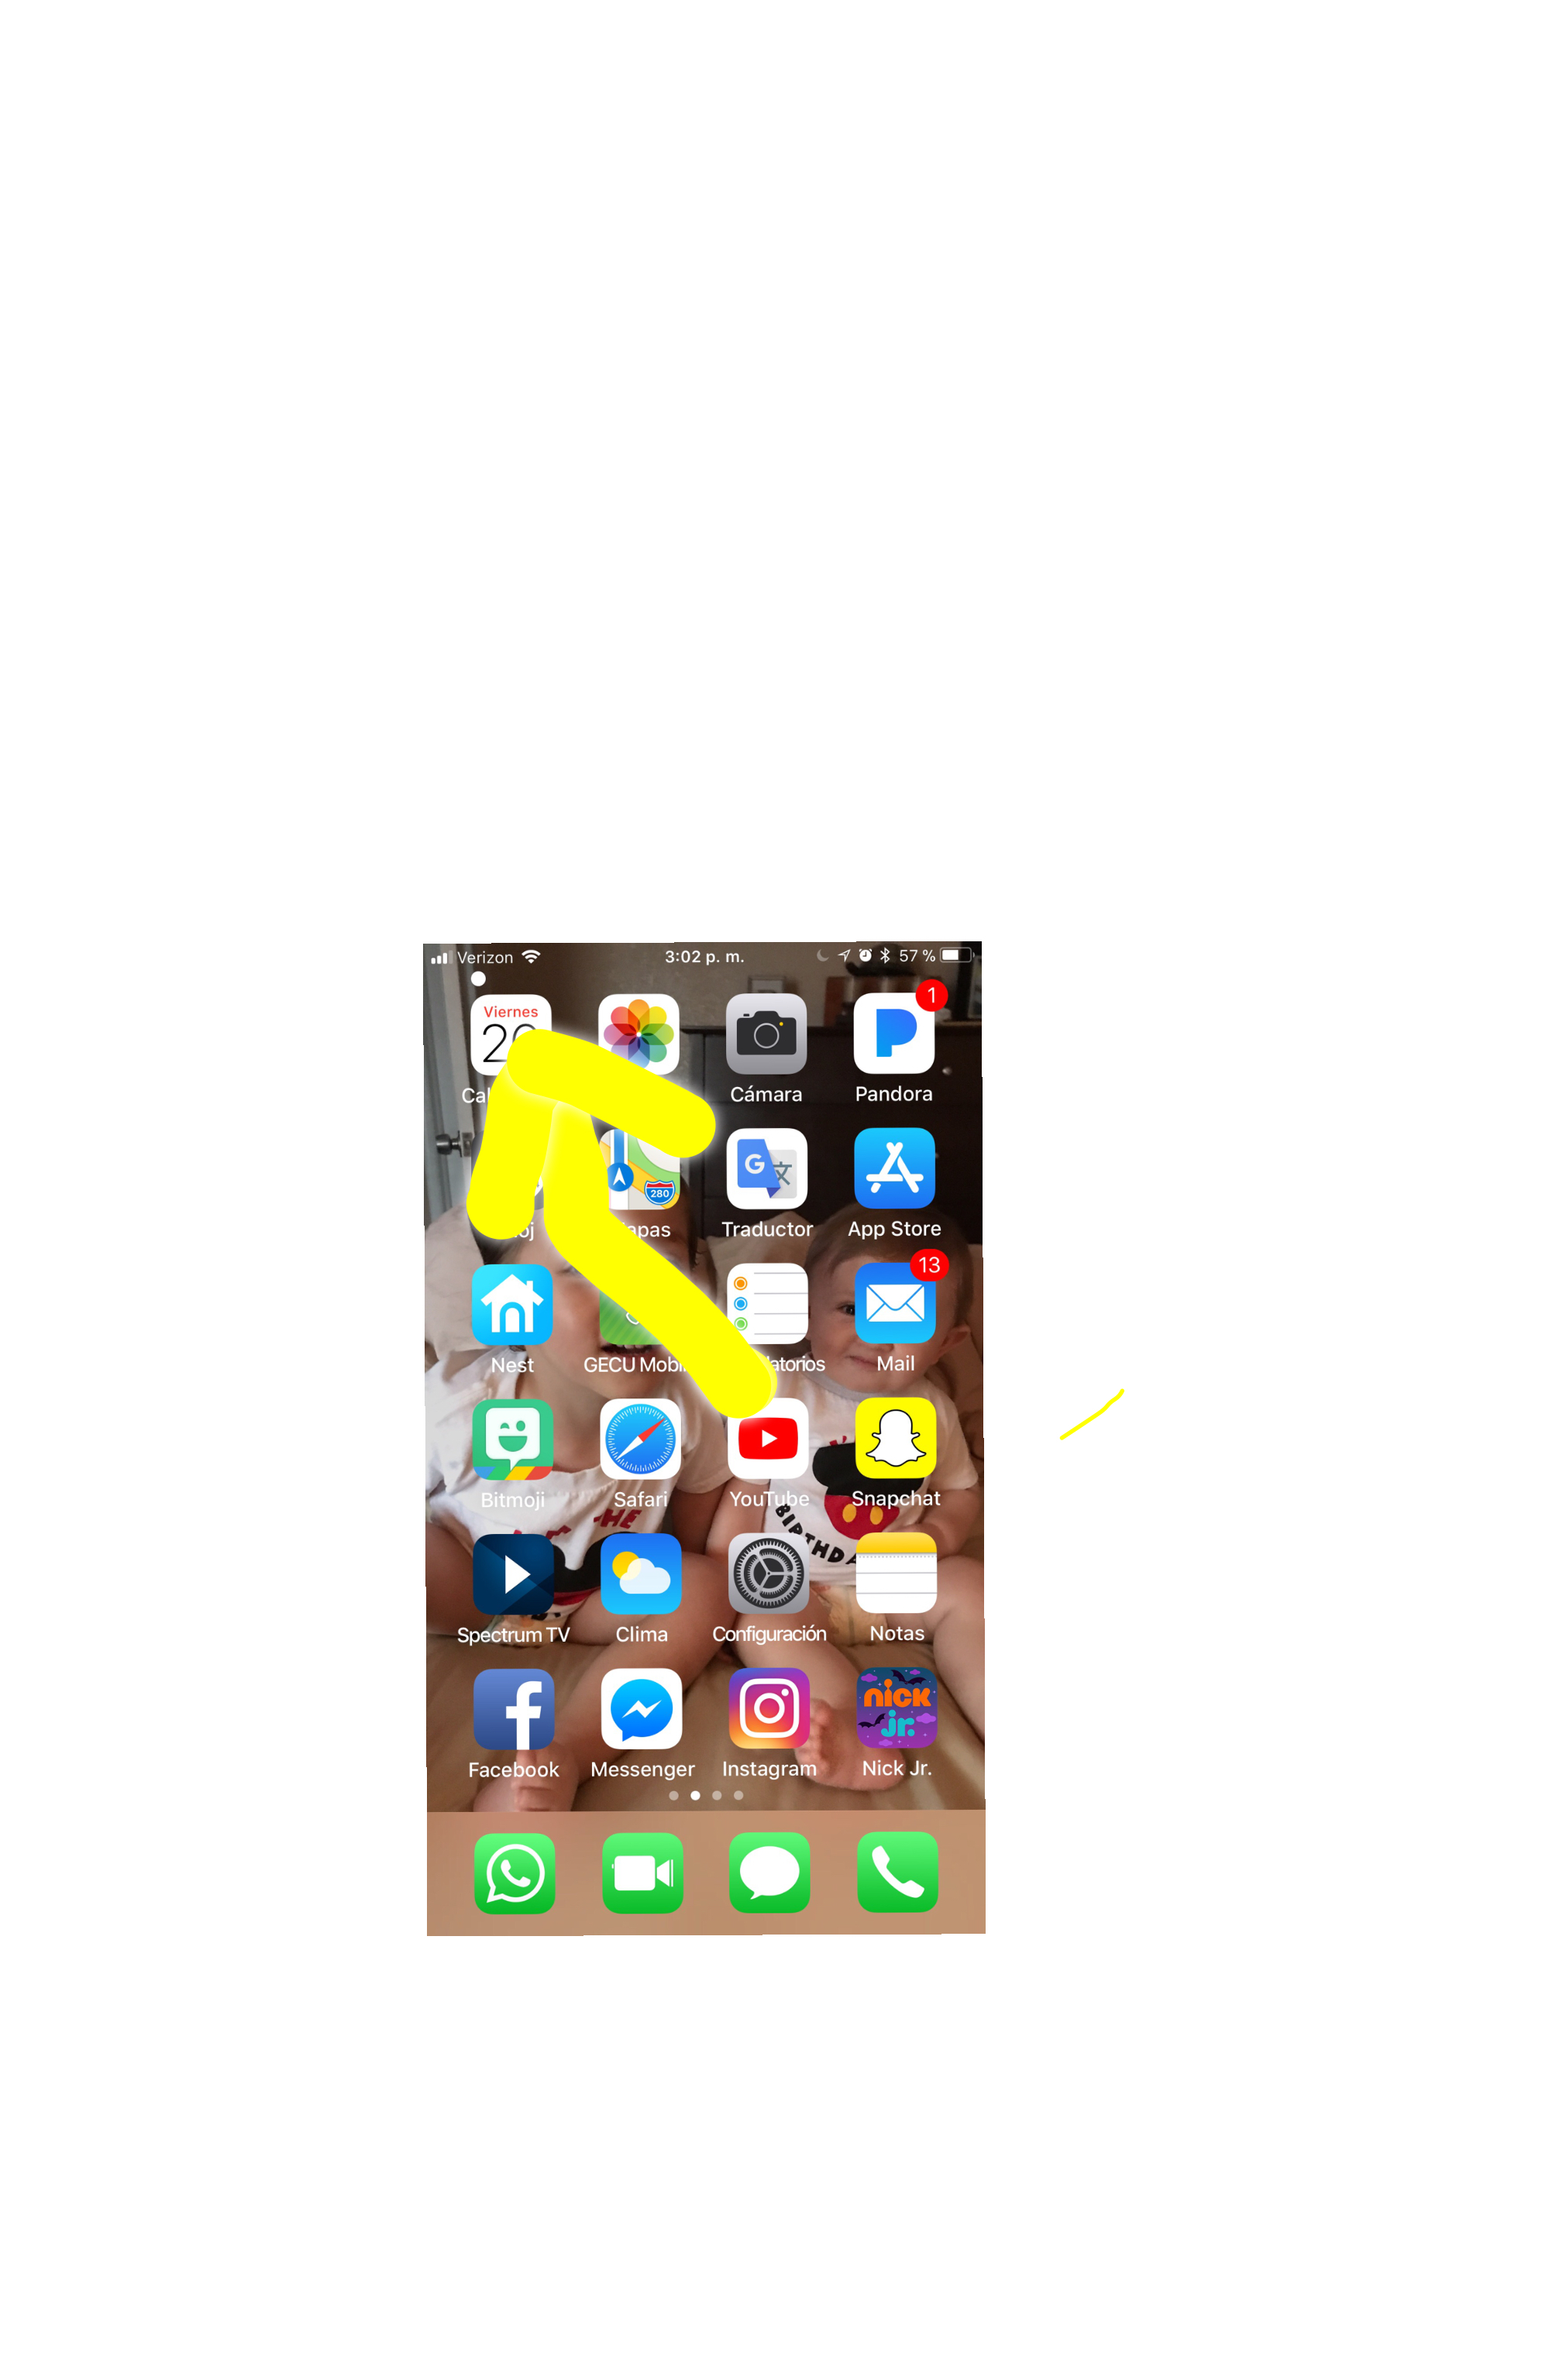 Luxury Small White Dot On Iphone Screen Top Left